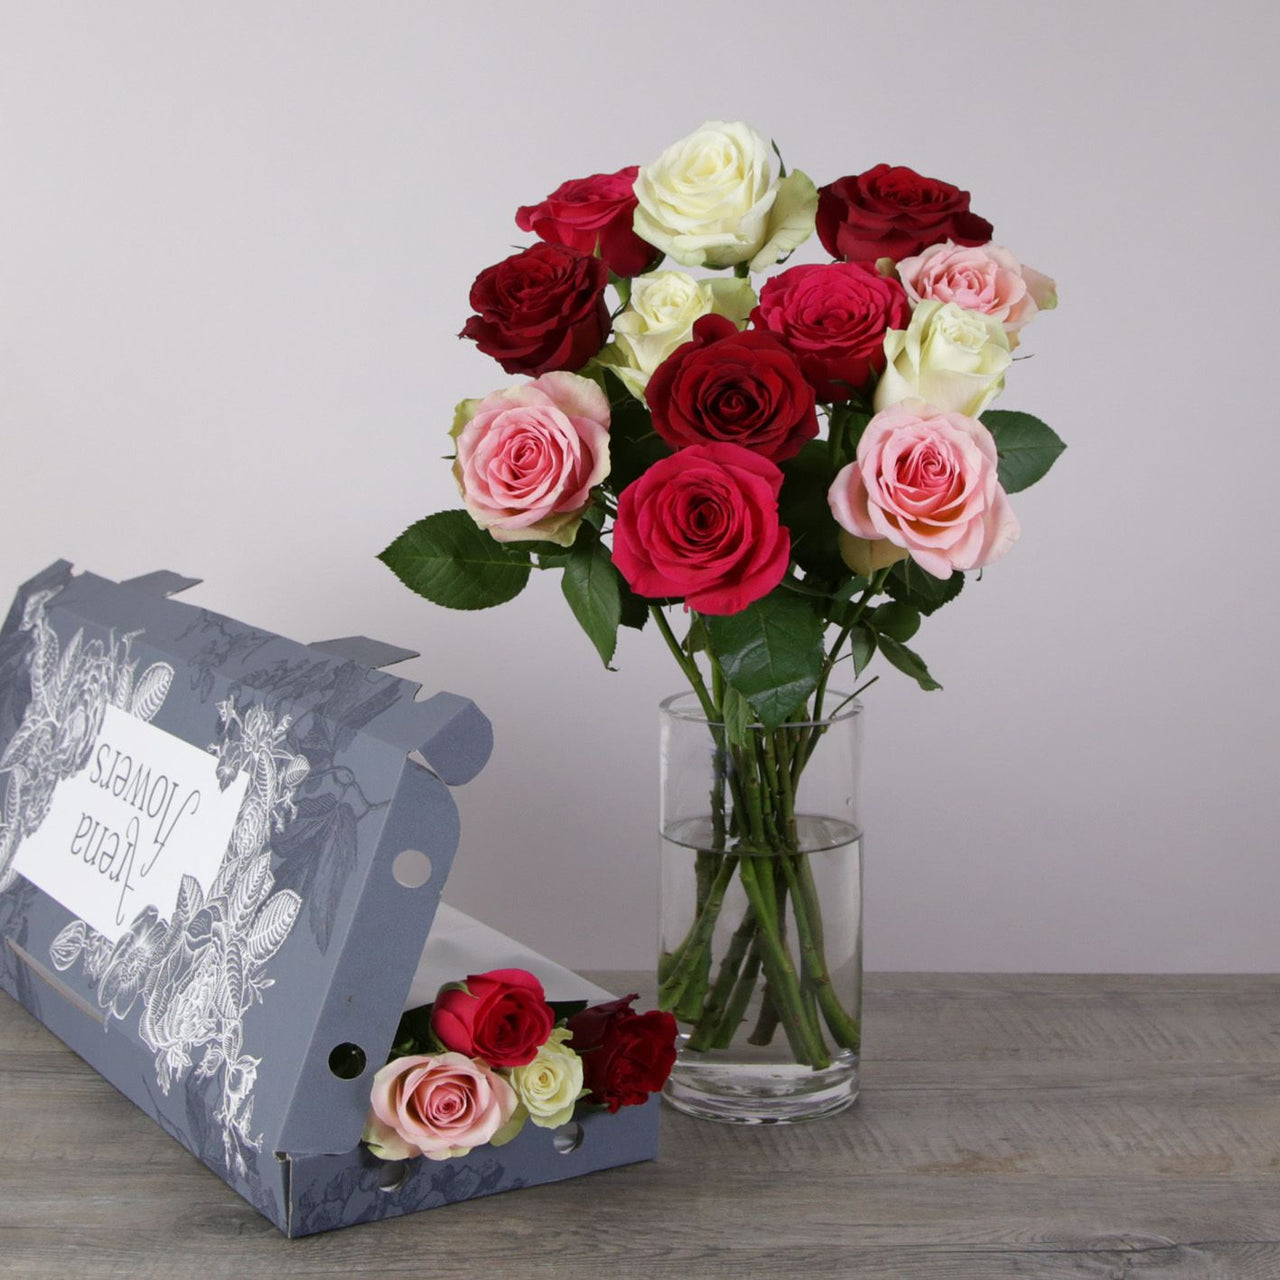 Romantic Letterbox - Weekly Subscription